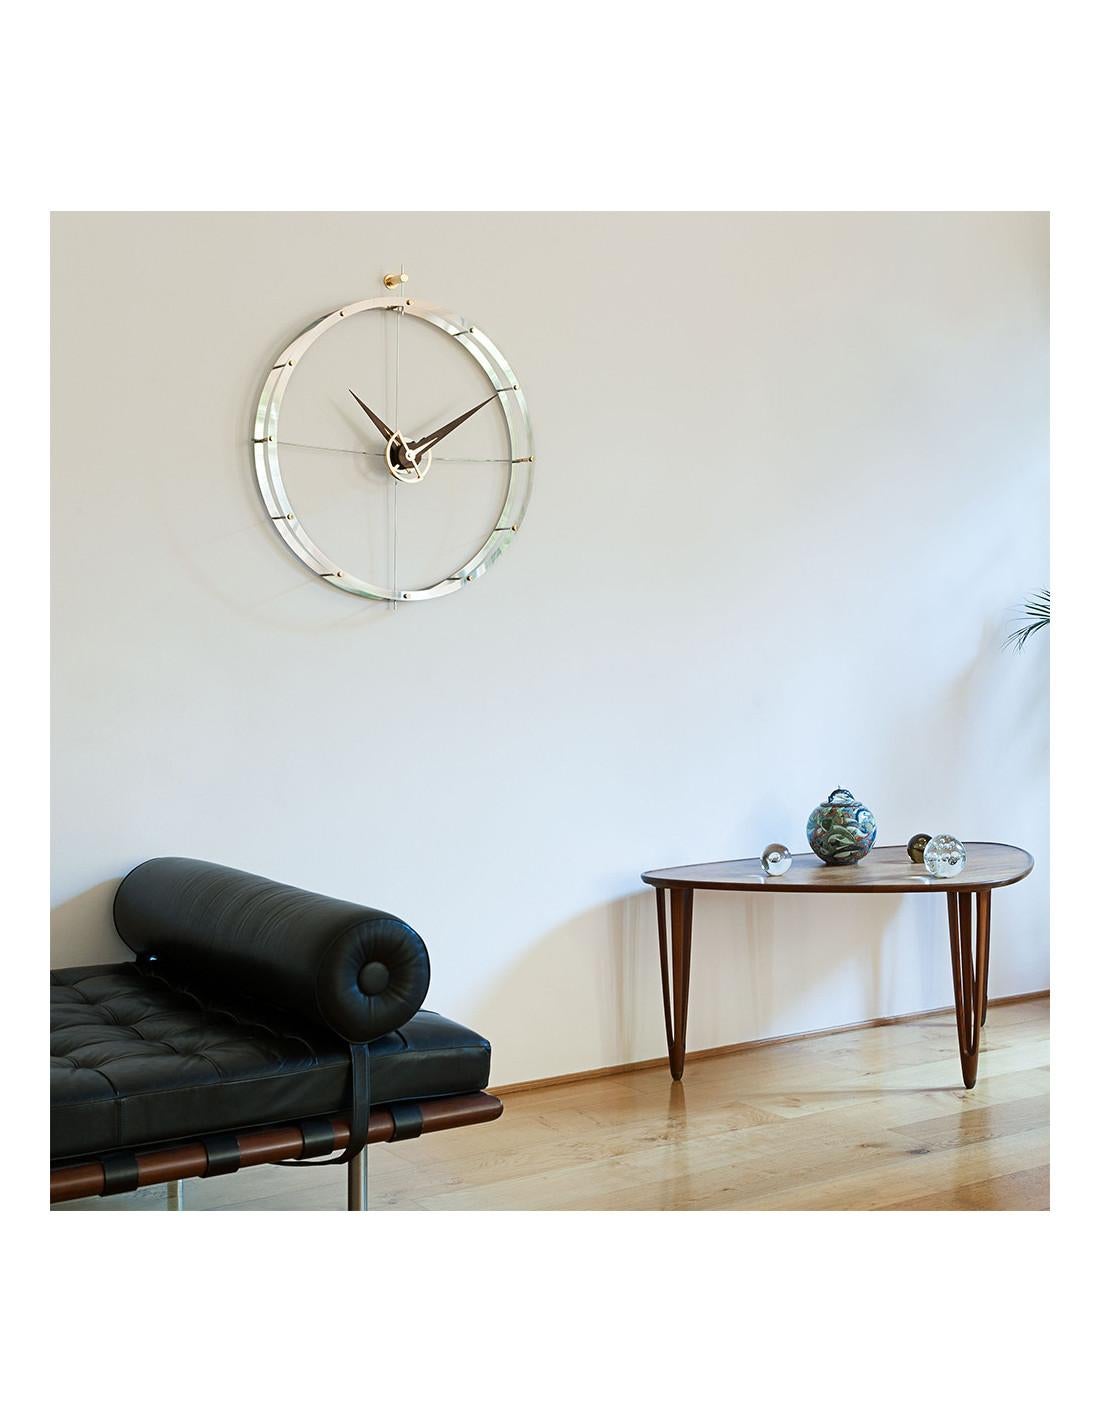 This clock is a unique piece with an innovative design that will fit in any modern environment. Each clock is a unique handmade piece.
Not OK for Outdoor Use.
Warranty: 1 year.
Doble O g wall clock: Stainless steel ring and brass, wooden wenge